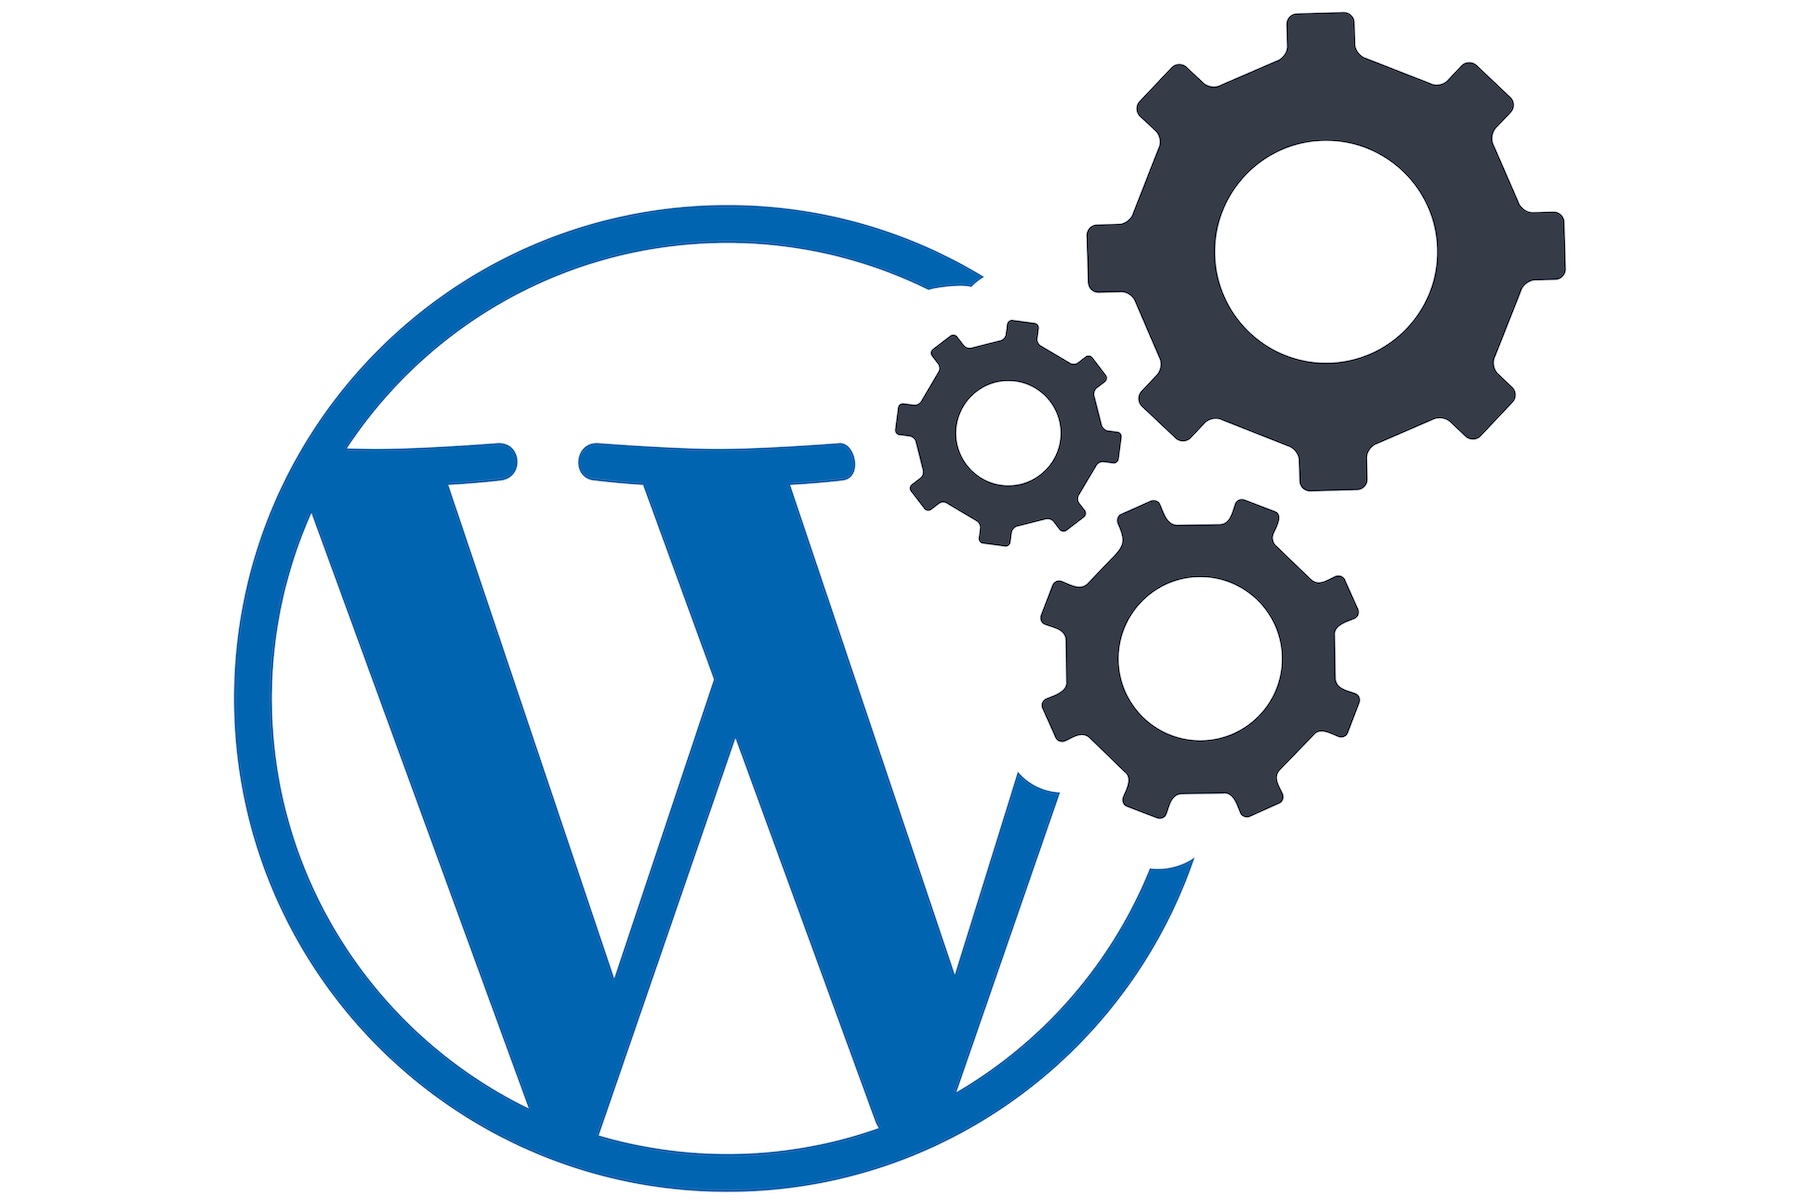 Celebrating WordPress: 21 Years of Innovation and Excellence